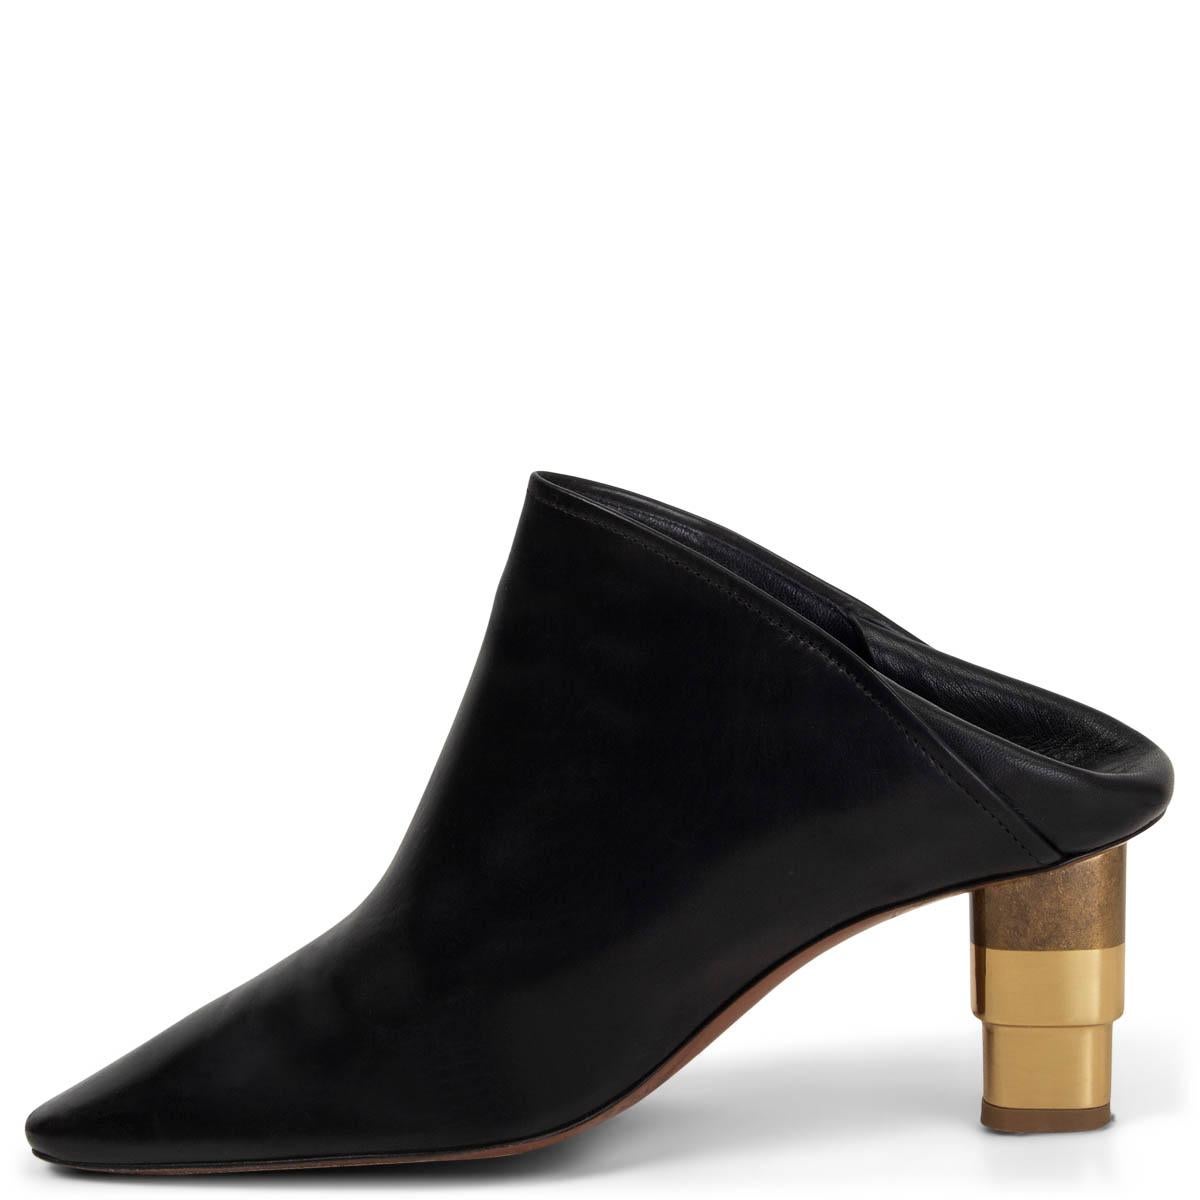 CELINE black leather 2016 CANDLE HEEL Mules Shoes 37.5